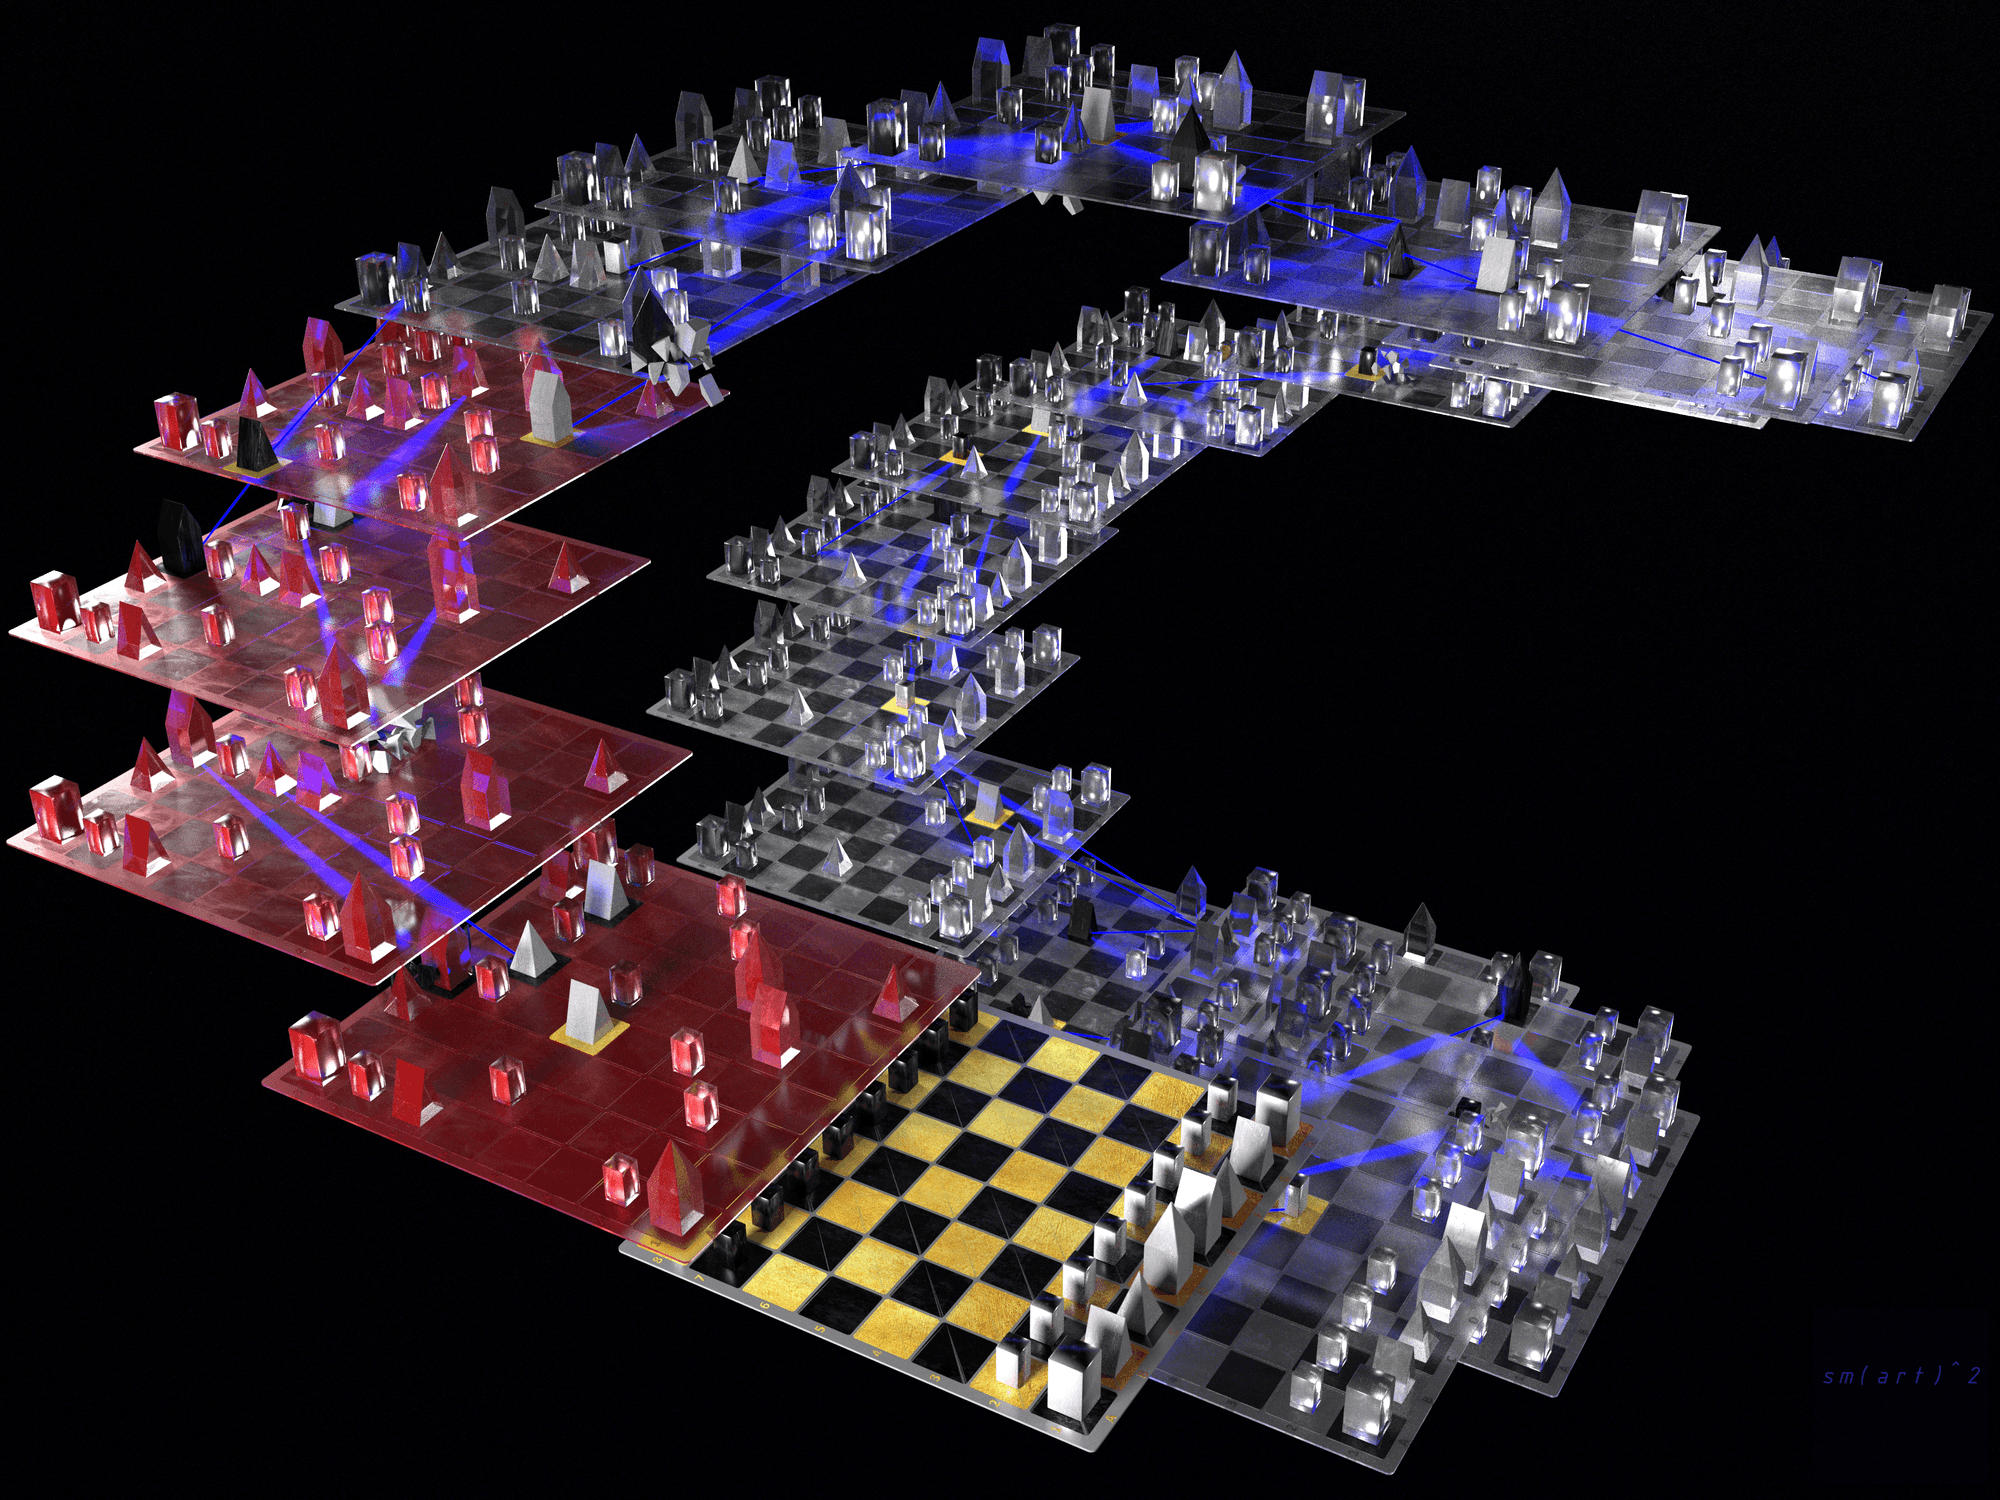 Immortal Game: Play the Classic Game of Chess with NFT Pieces